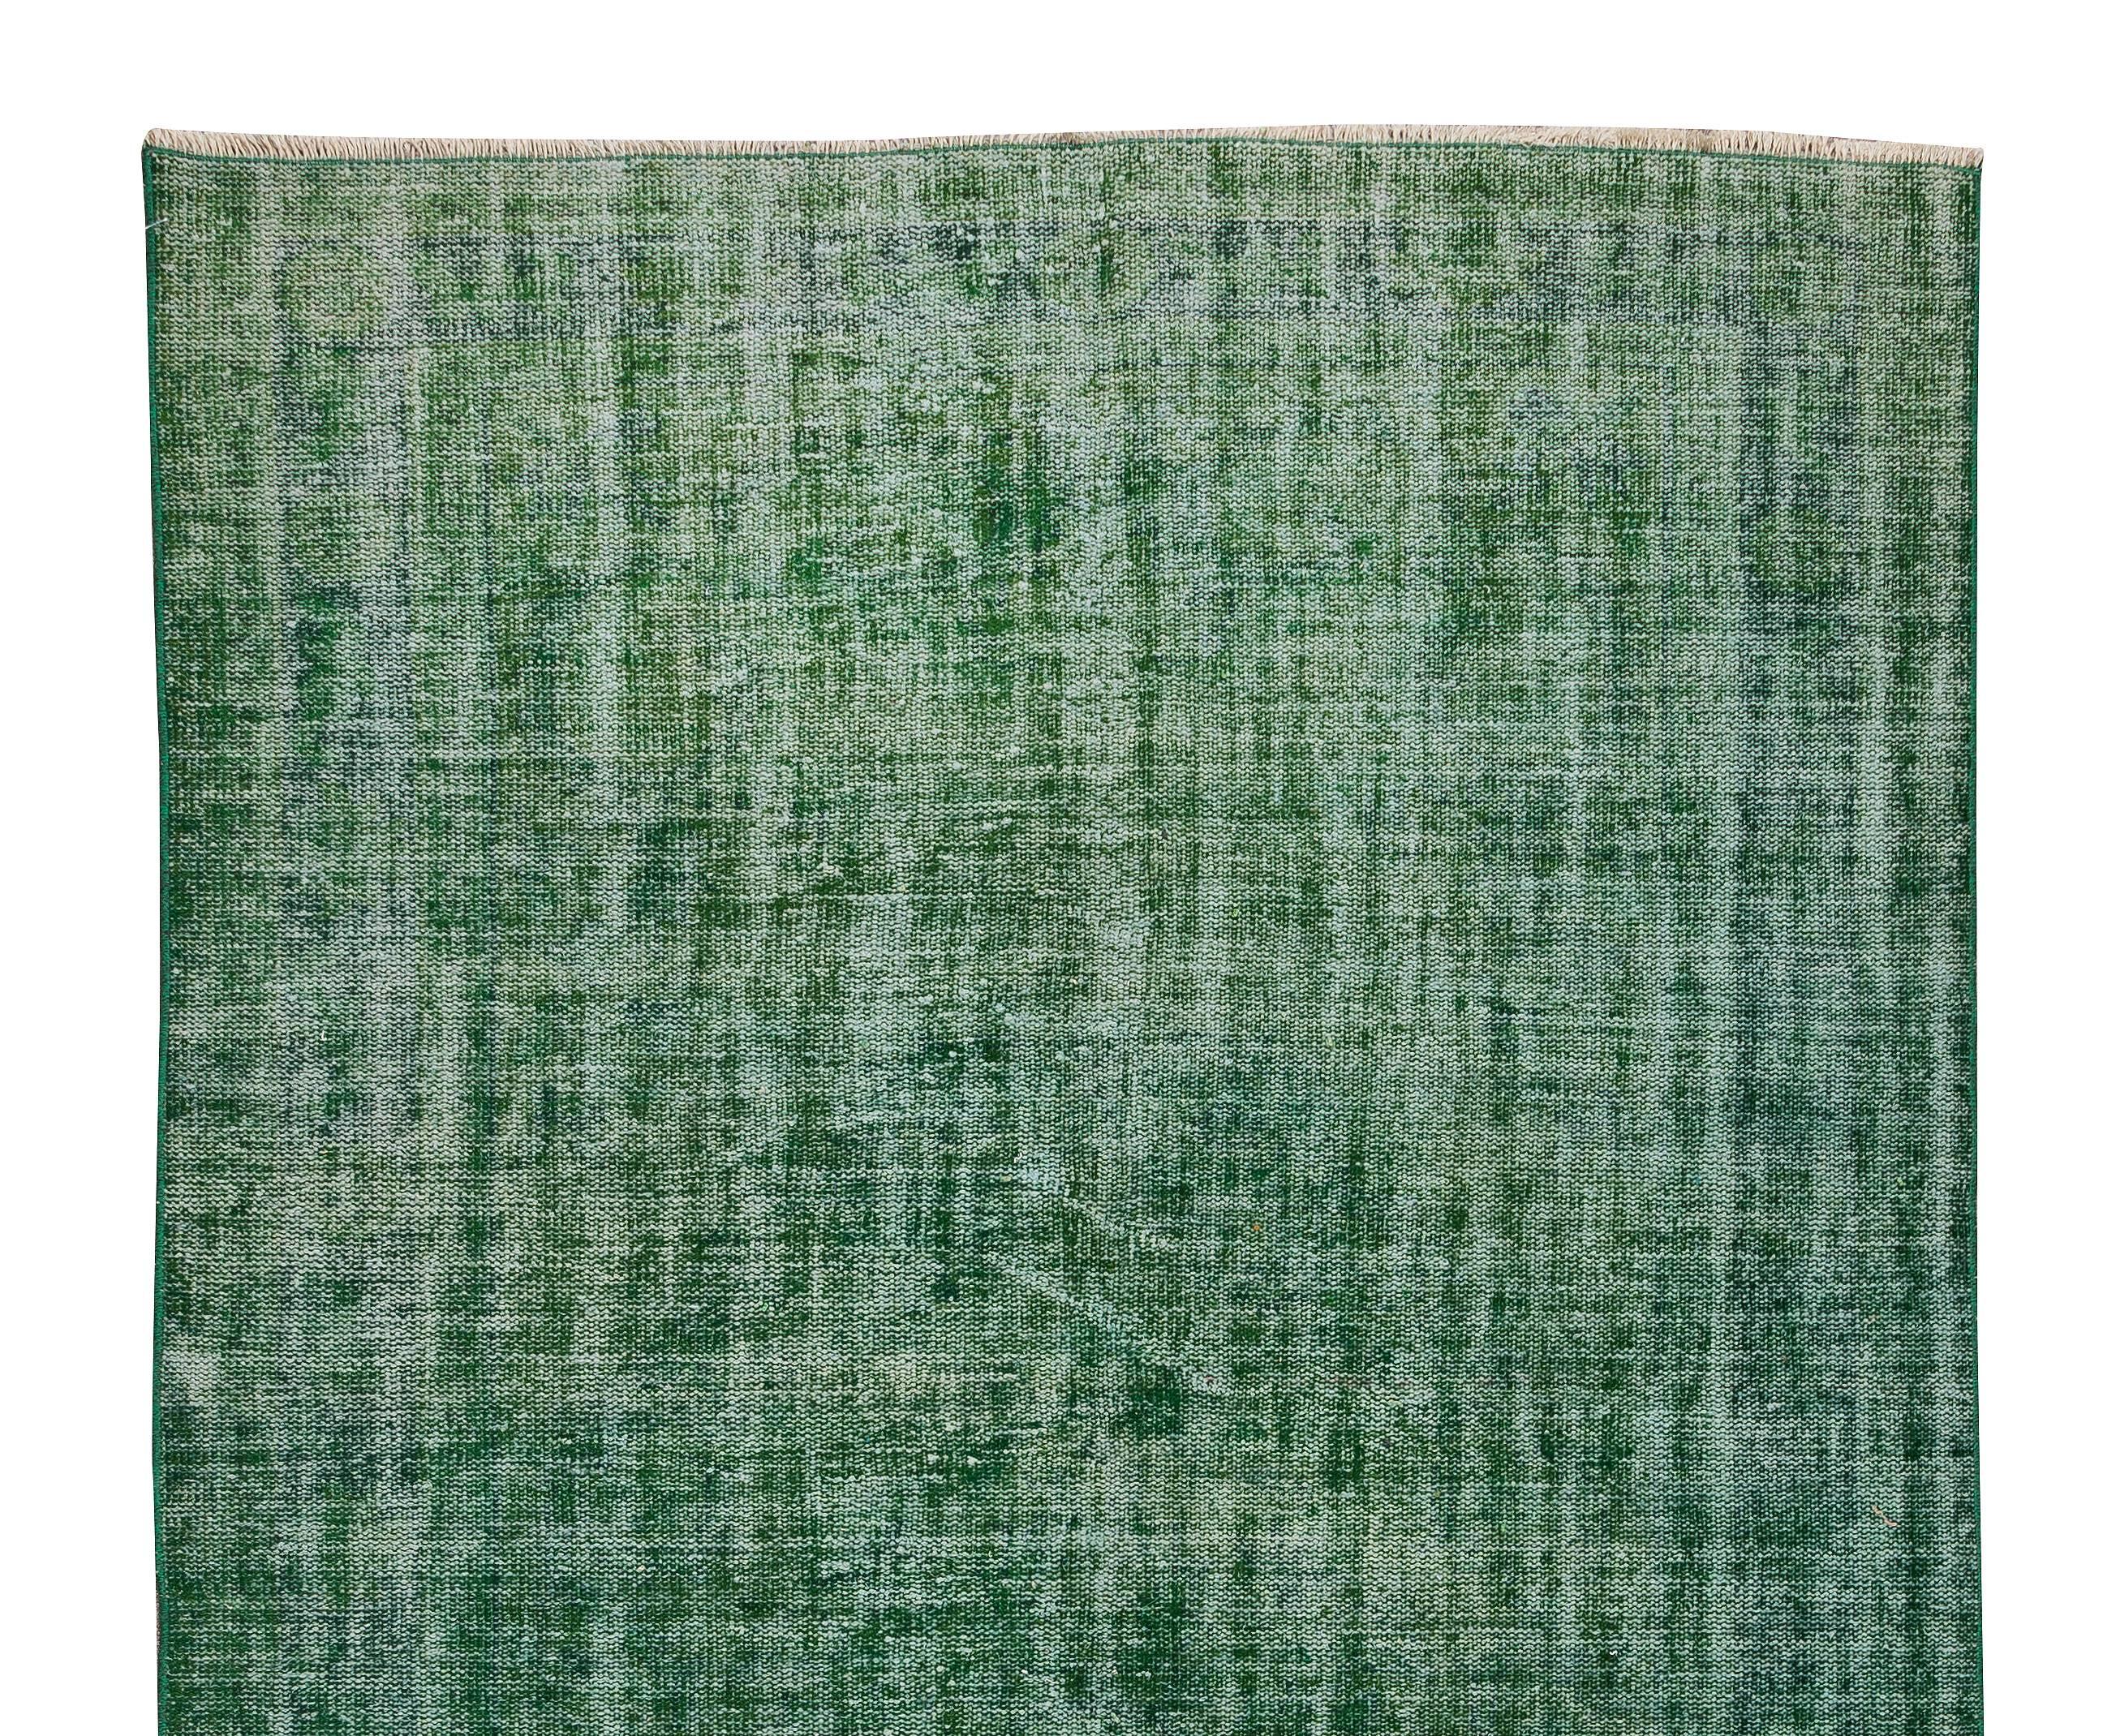 Hand-Knotted 5.7x9.8 Ft Handmade Vintage Turkish Rug, Plain Green Contemporary Wool Carpet For Sale